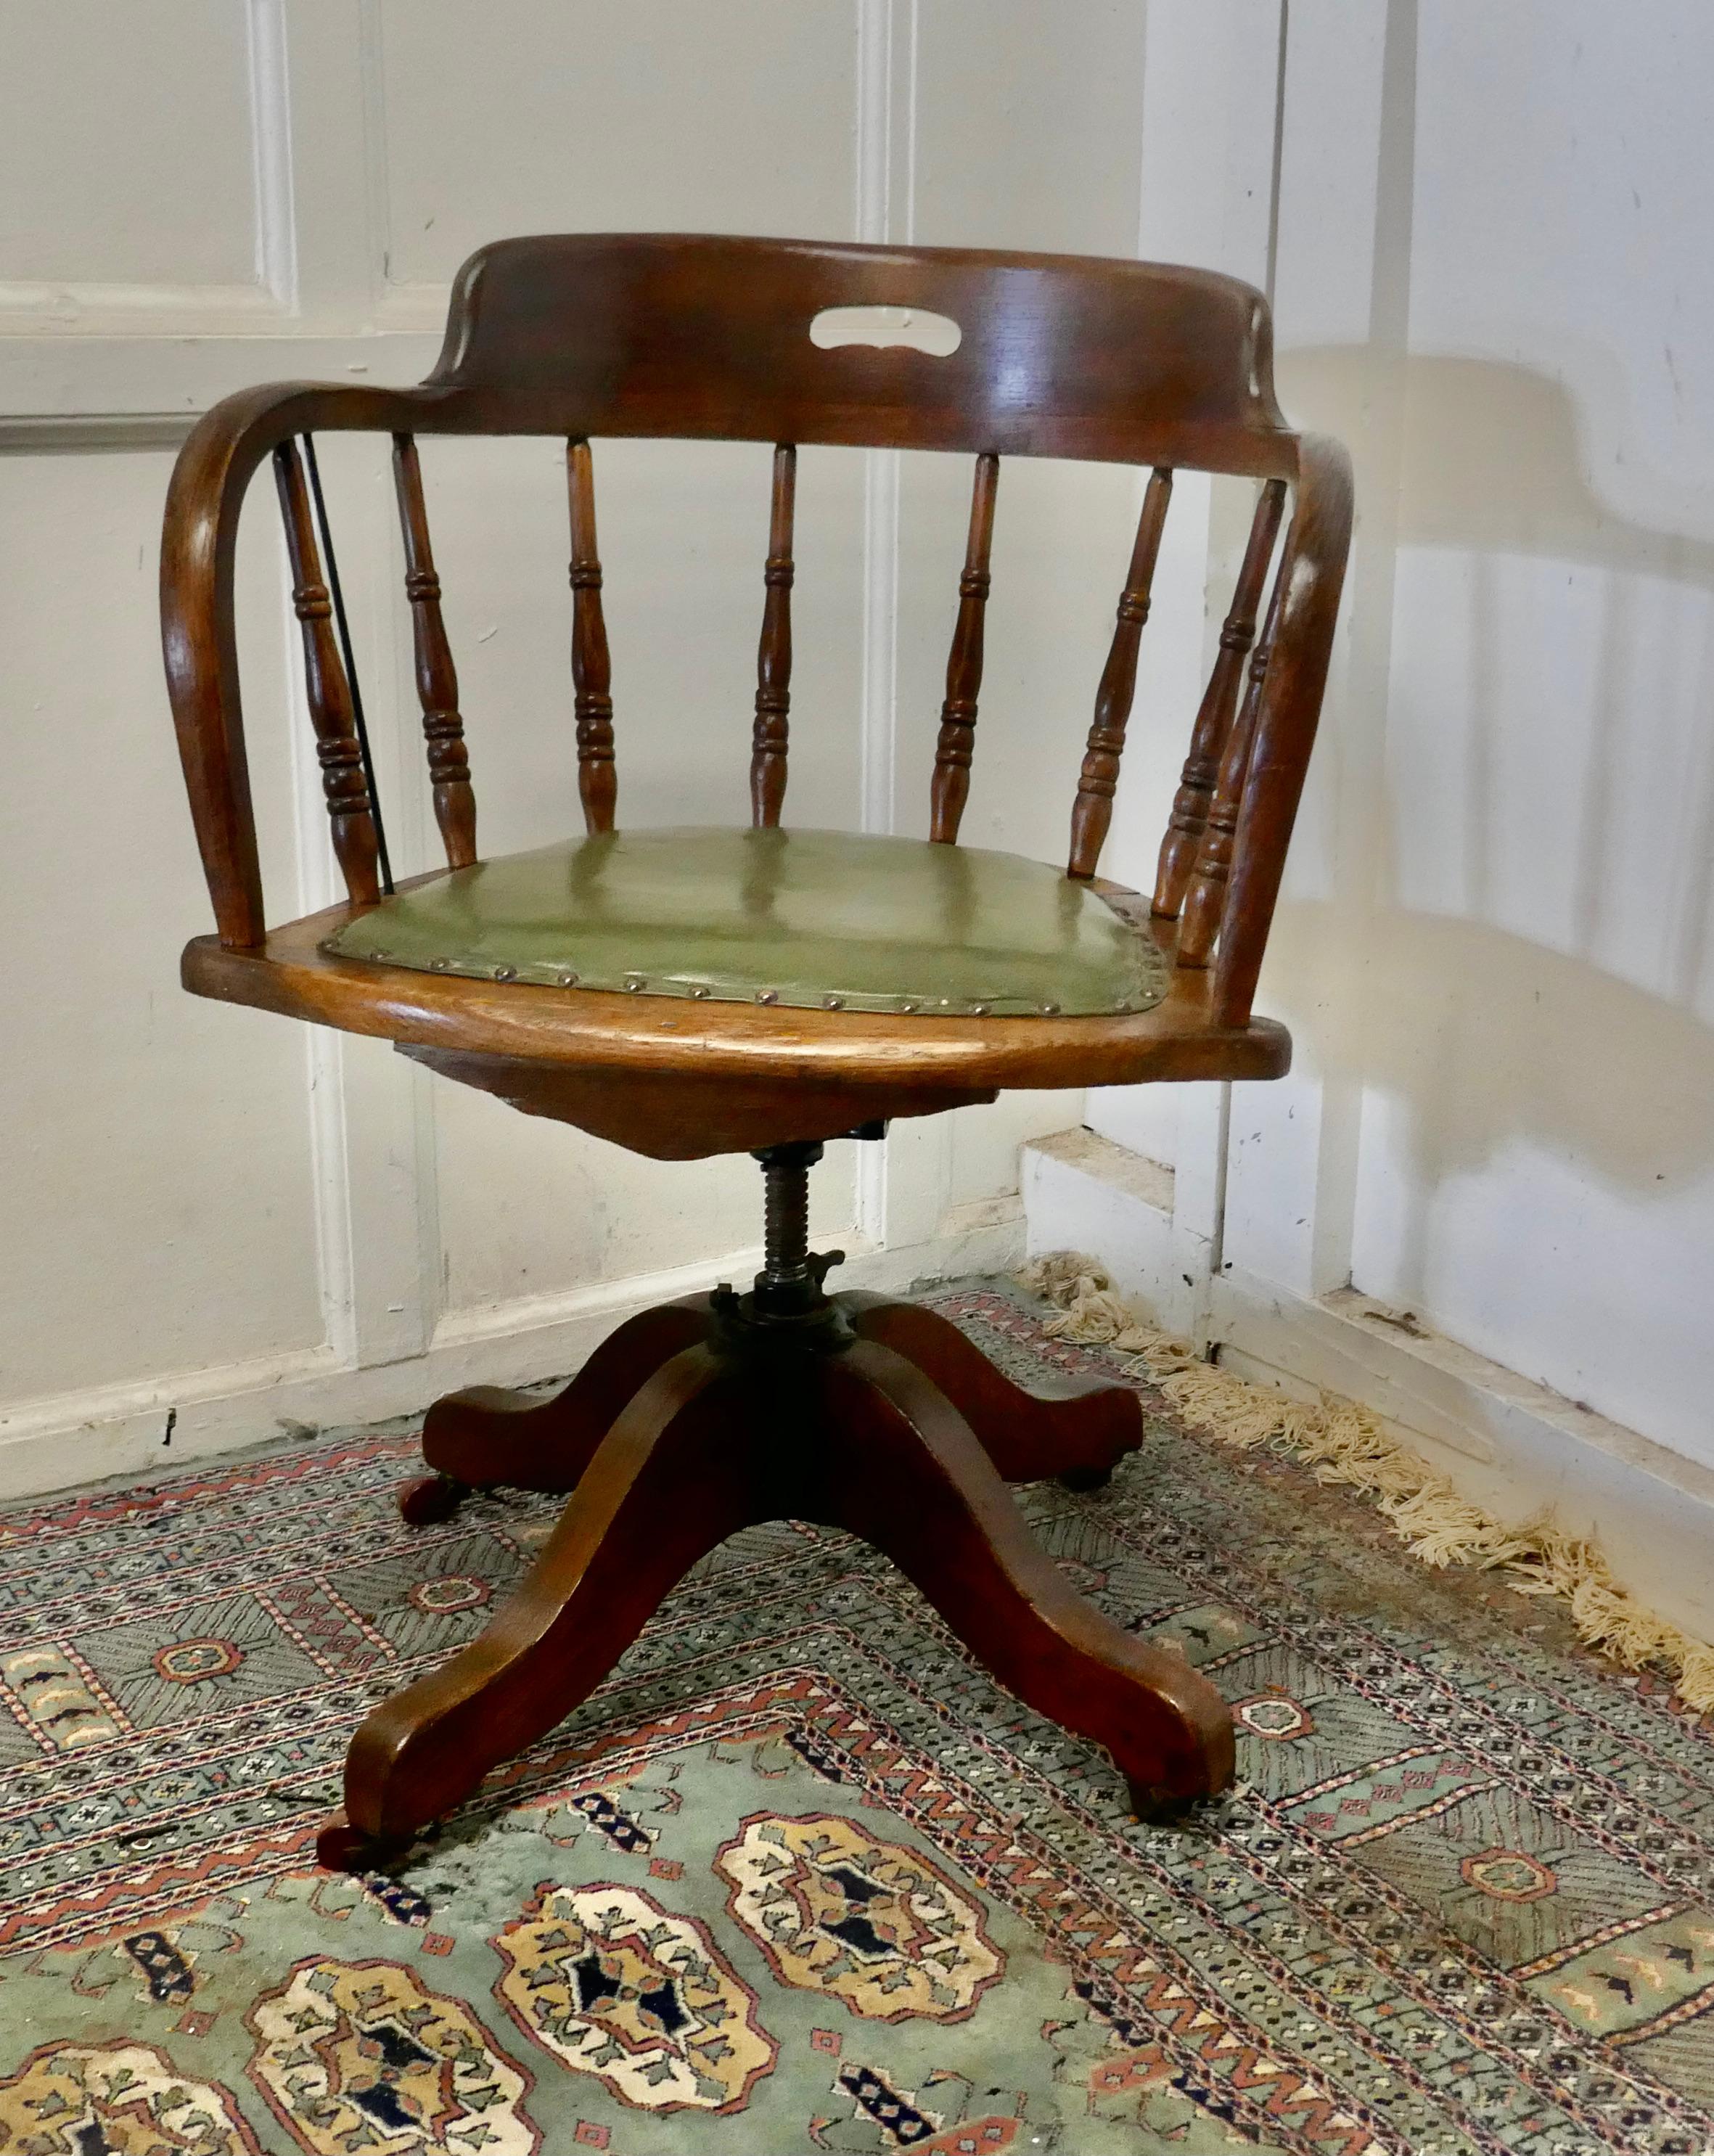 Edwardian oak office desk chair, smokers bow

This office or desk chair has an attractive curving back with a very wide curved top rail and turned spindles beneath, the seat is upholstered in green hide with brass studs
The chair swivels rises